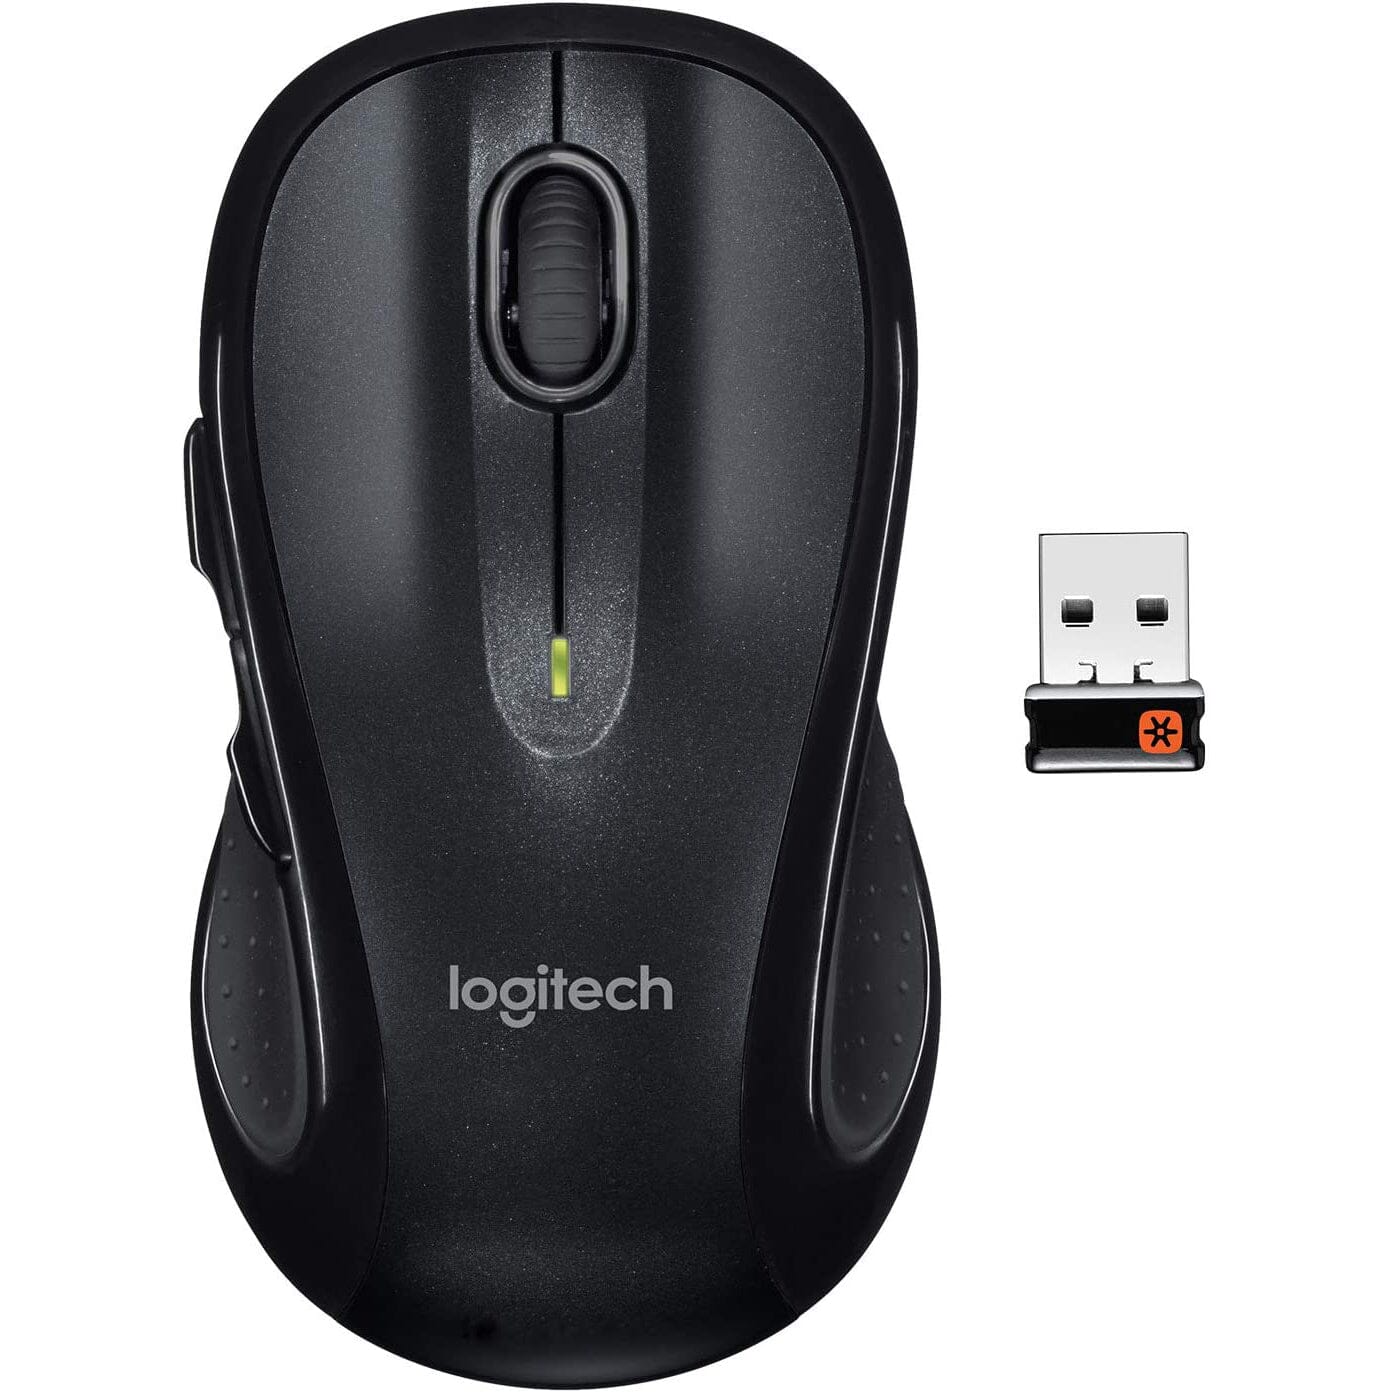 Logitech M510 Wireless Computer Mouse w/Unifying Receiver (Refurbished)